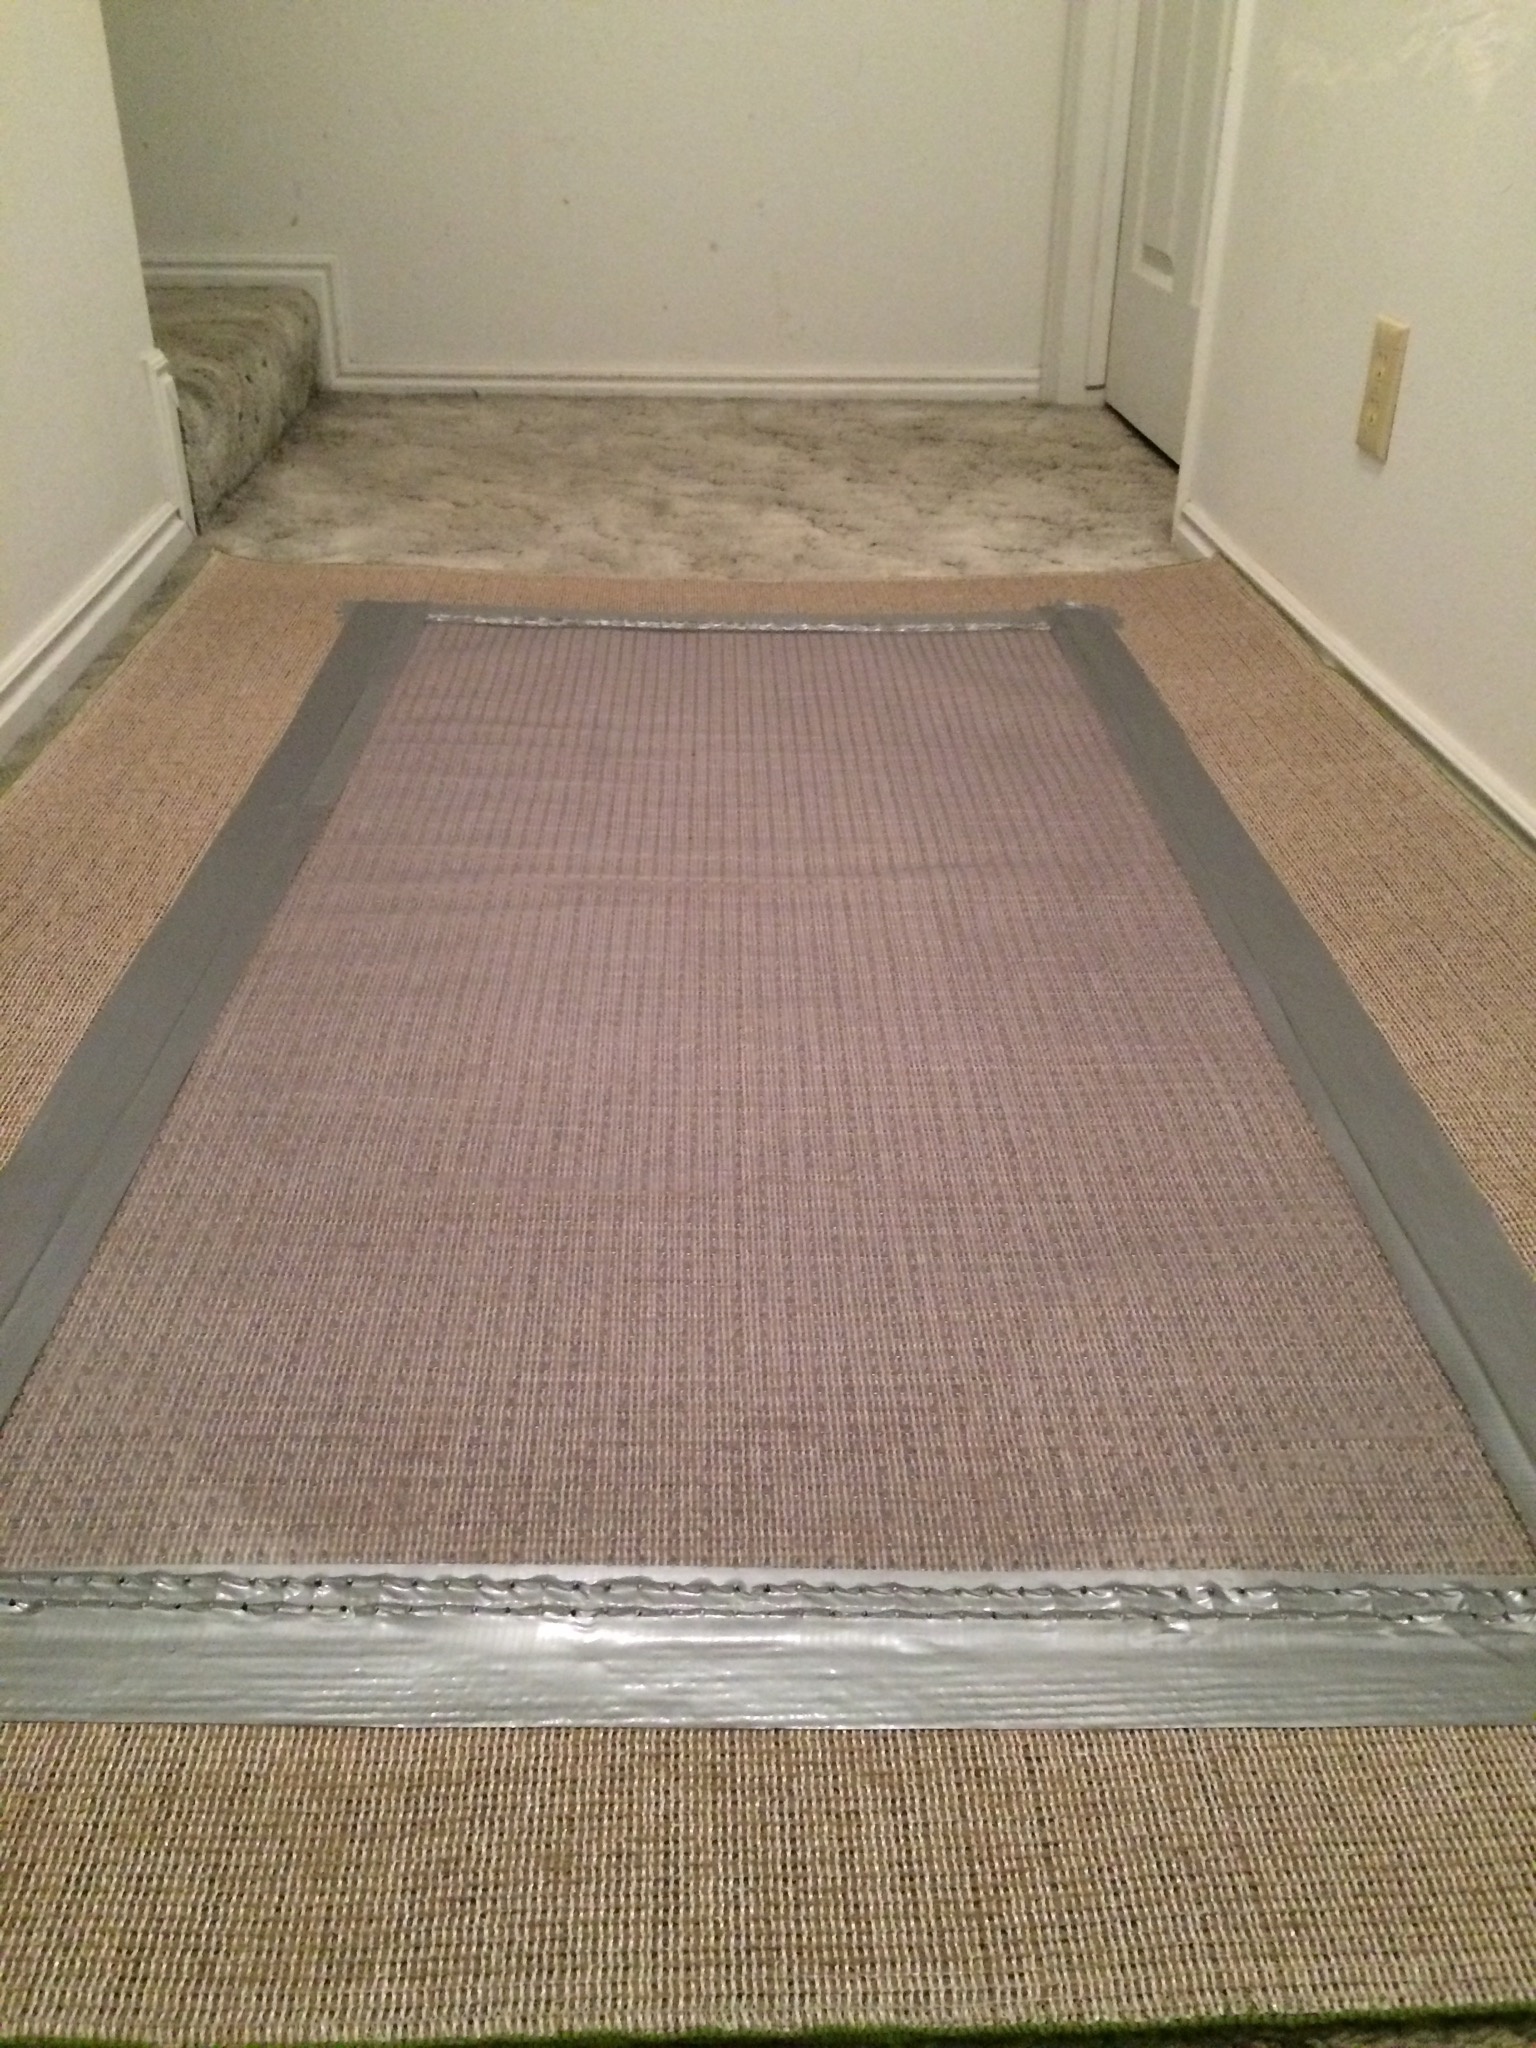 How to Secure an Area Rug on Top of Carpet